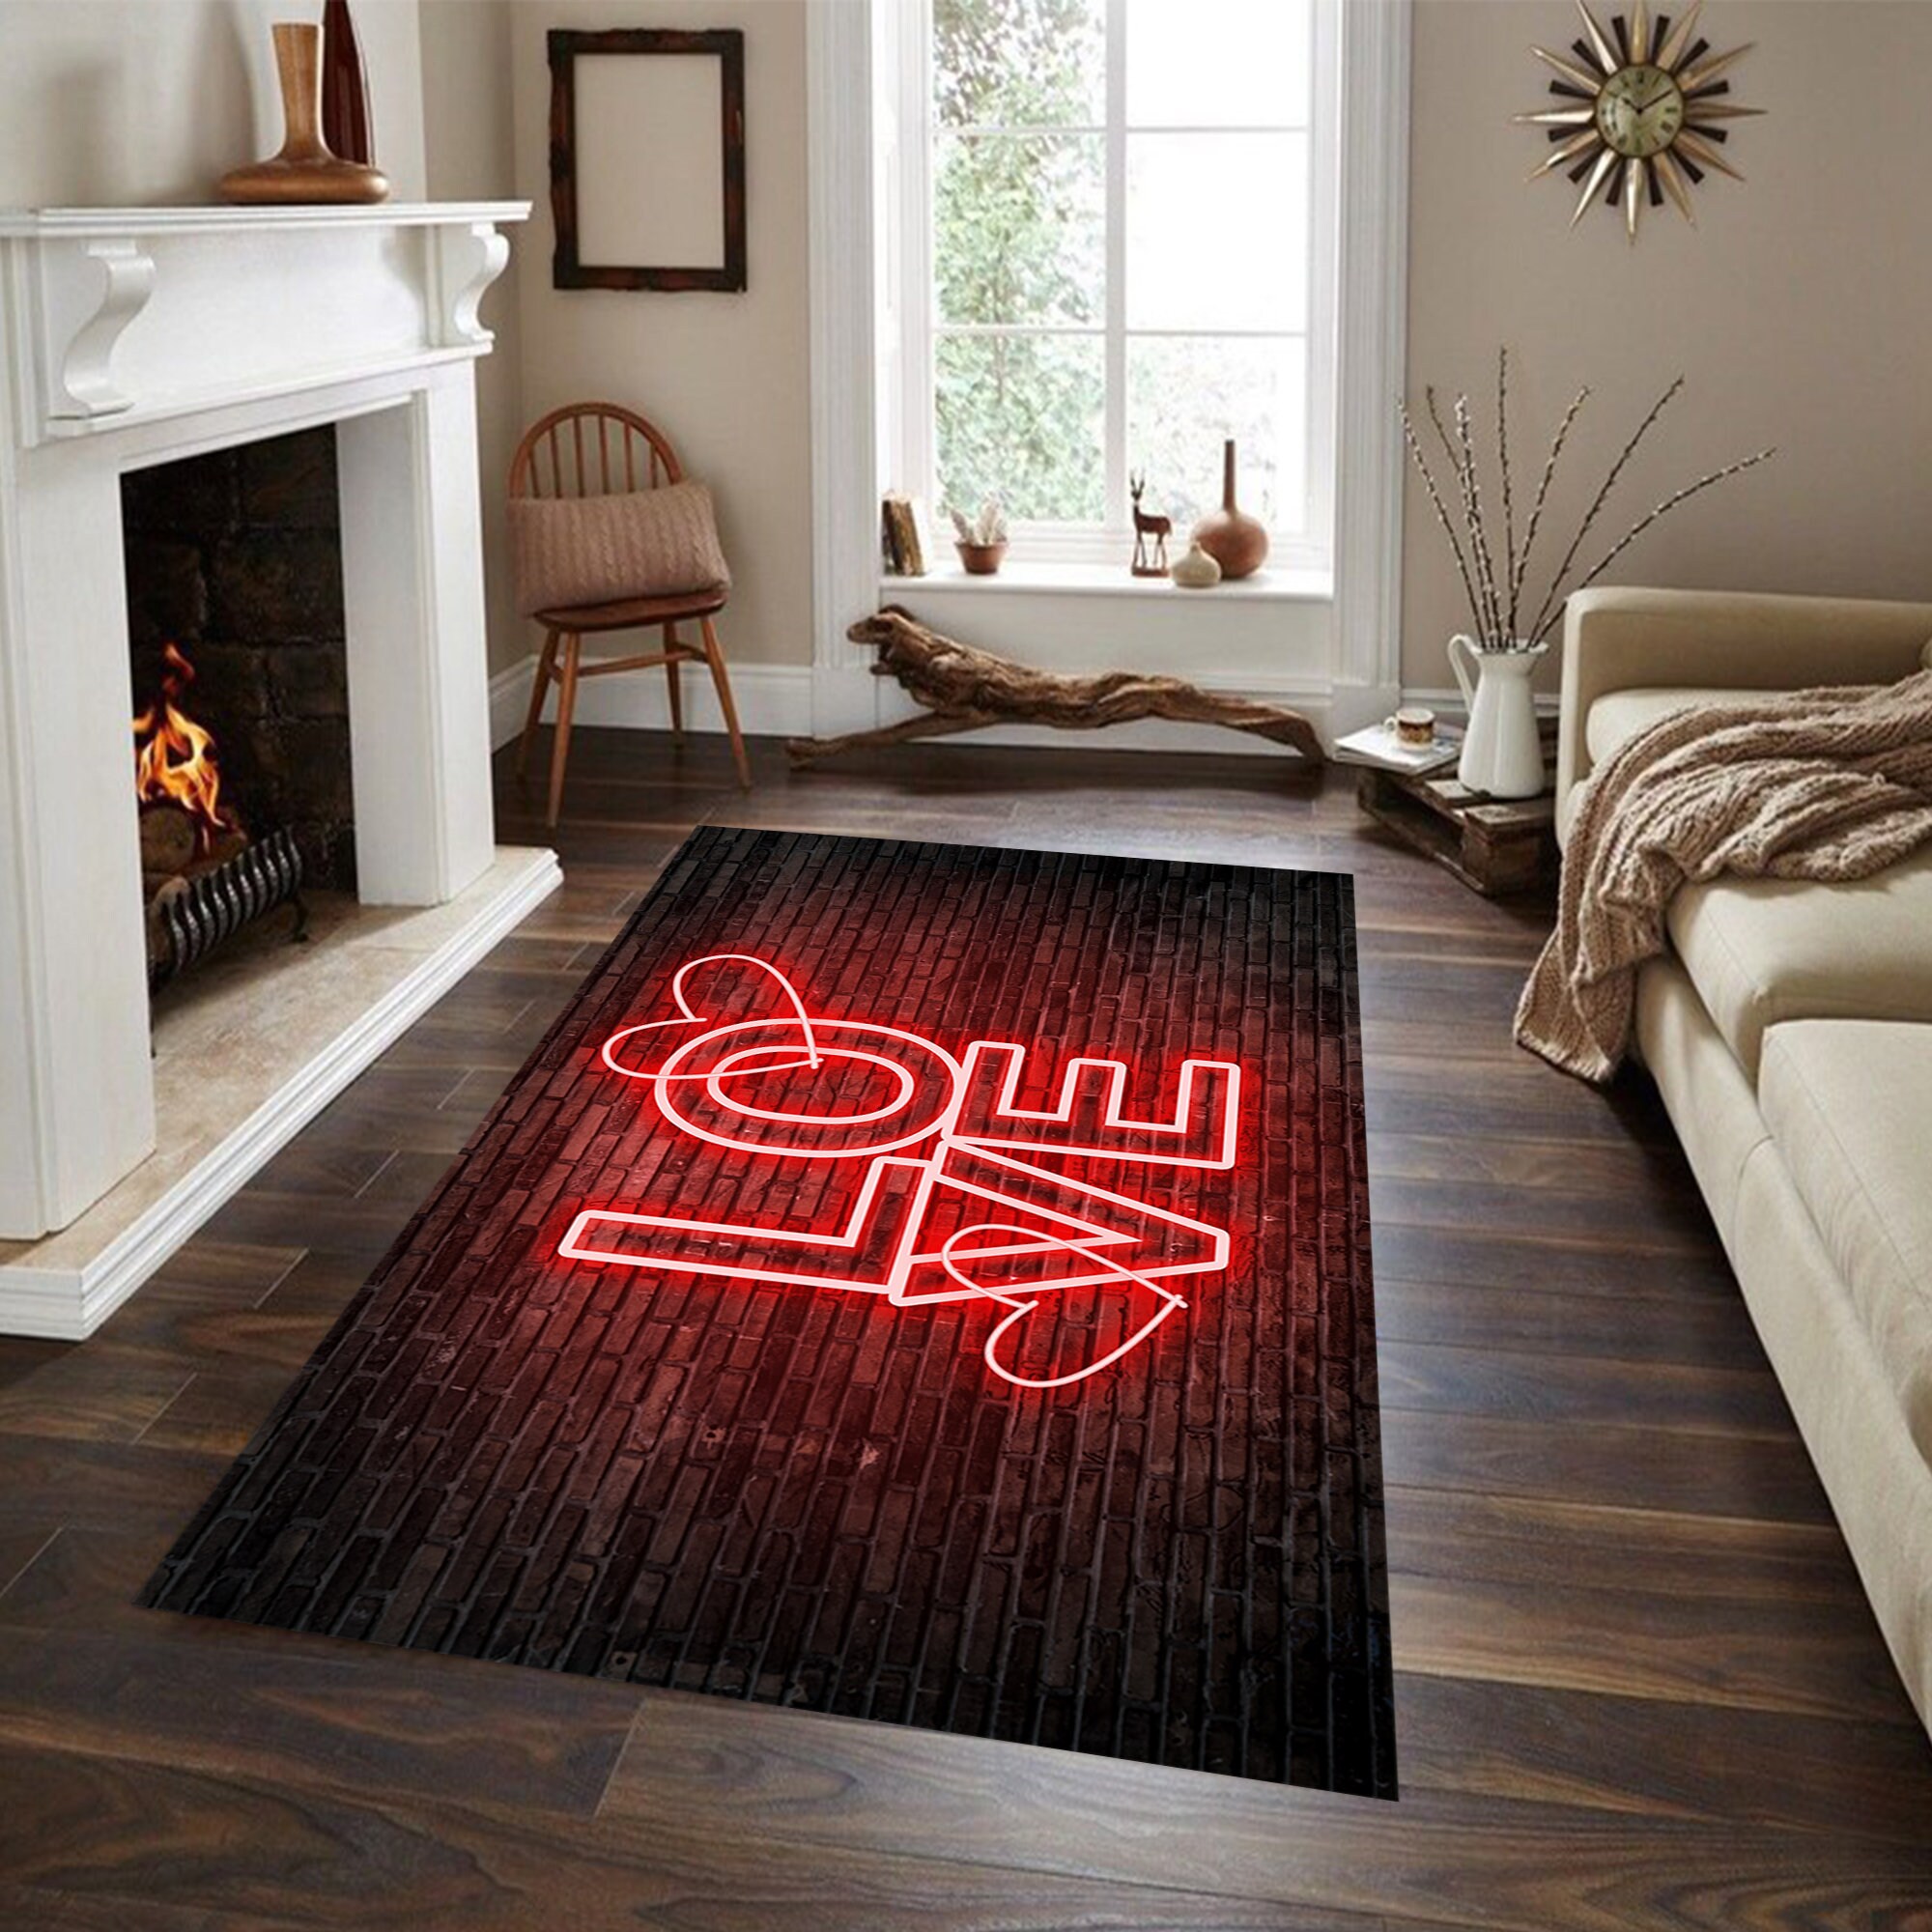 Discover Heart Theme Rug, Love Themed Rug, Sparkly Rug, Red Rose Rug, Valentine's Day Rug, Valentines Day, Valentines Rug, Love Rug, Romantic Rug